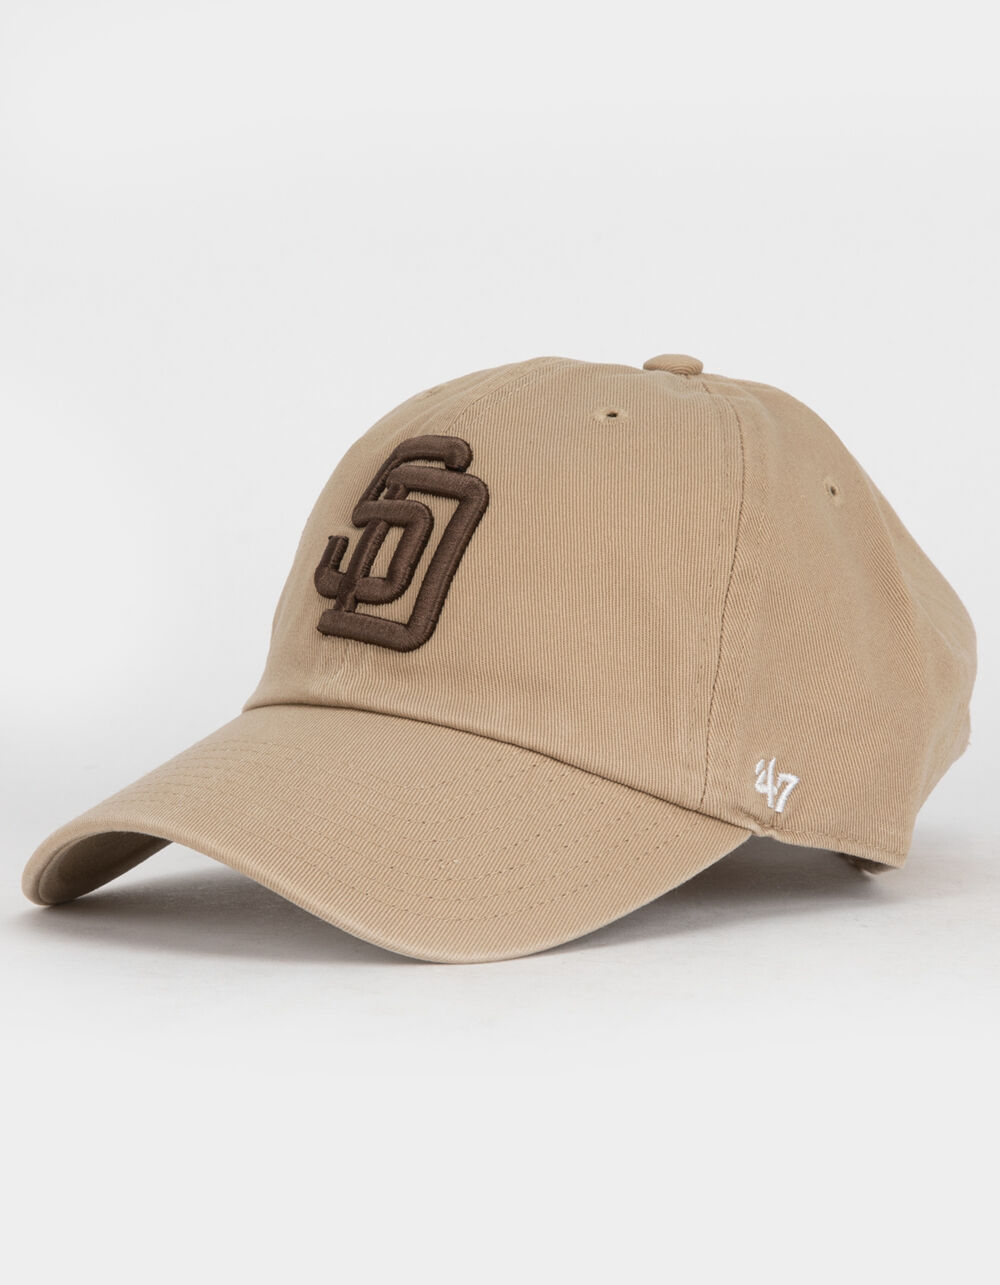 San Diego Padres New Era 5950 Fitted Hat  Alt  Green